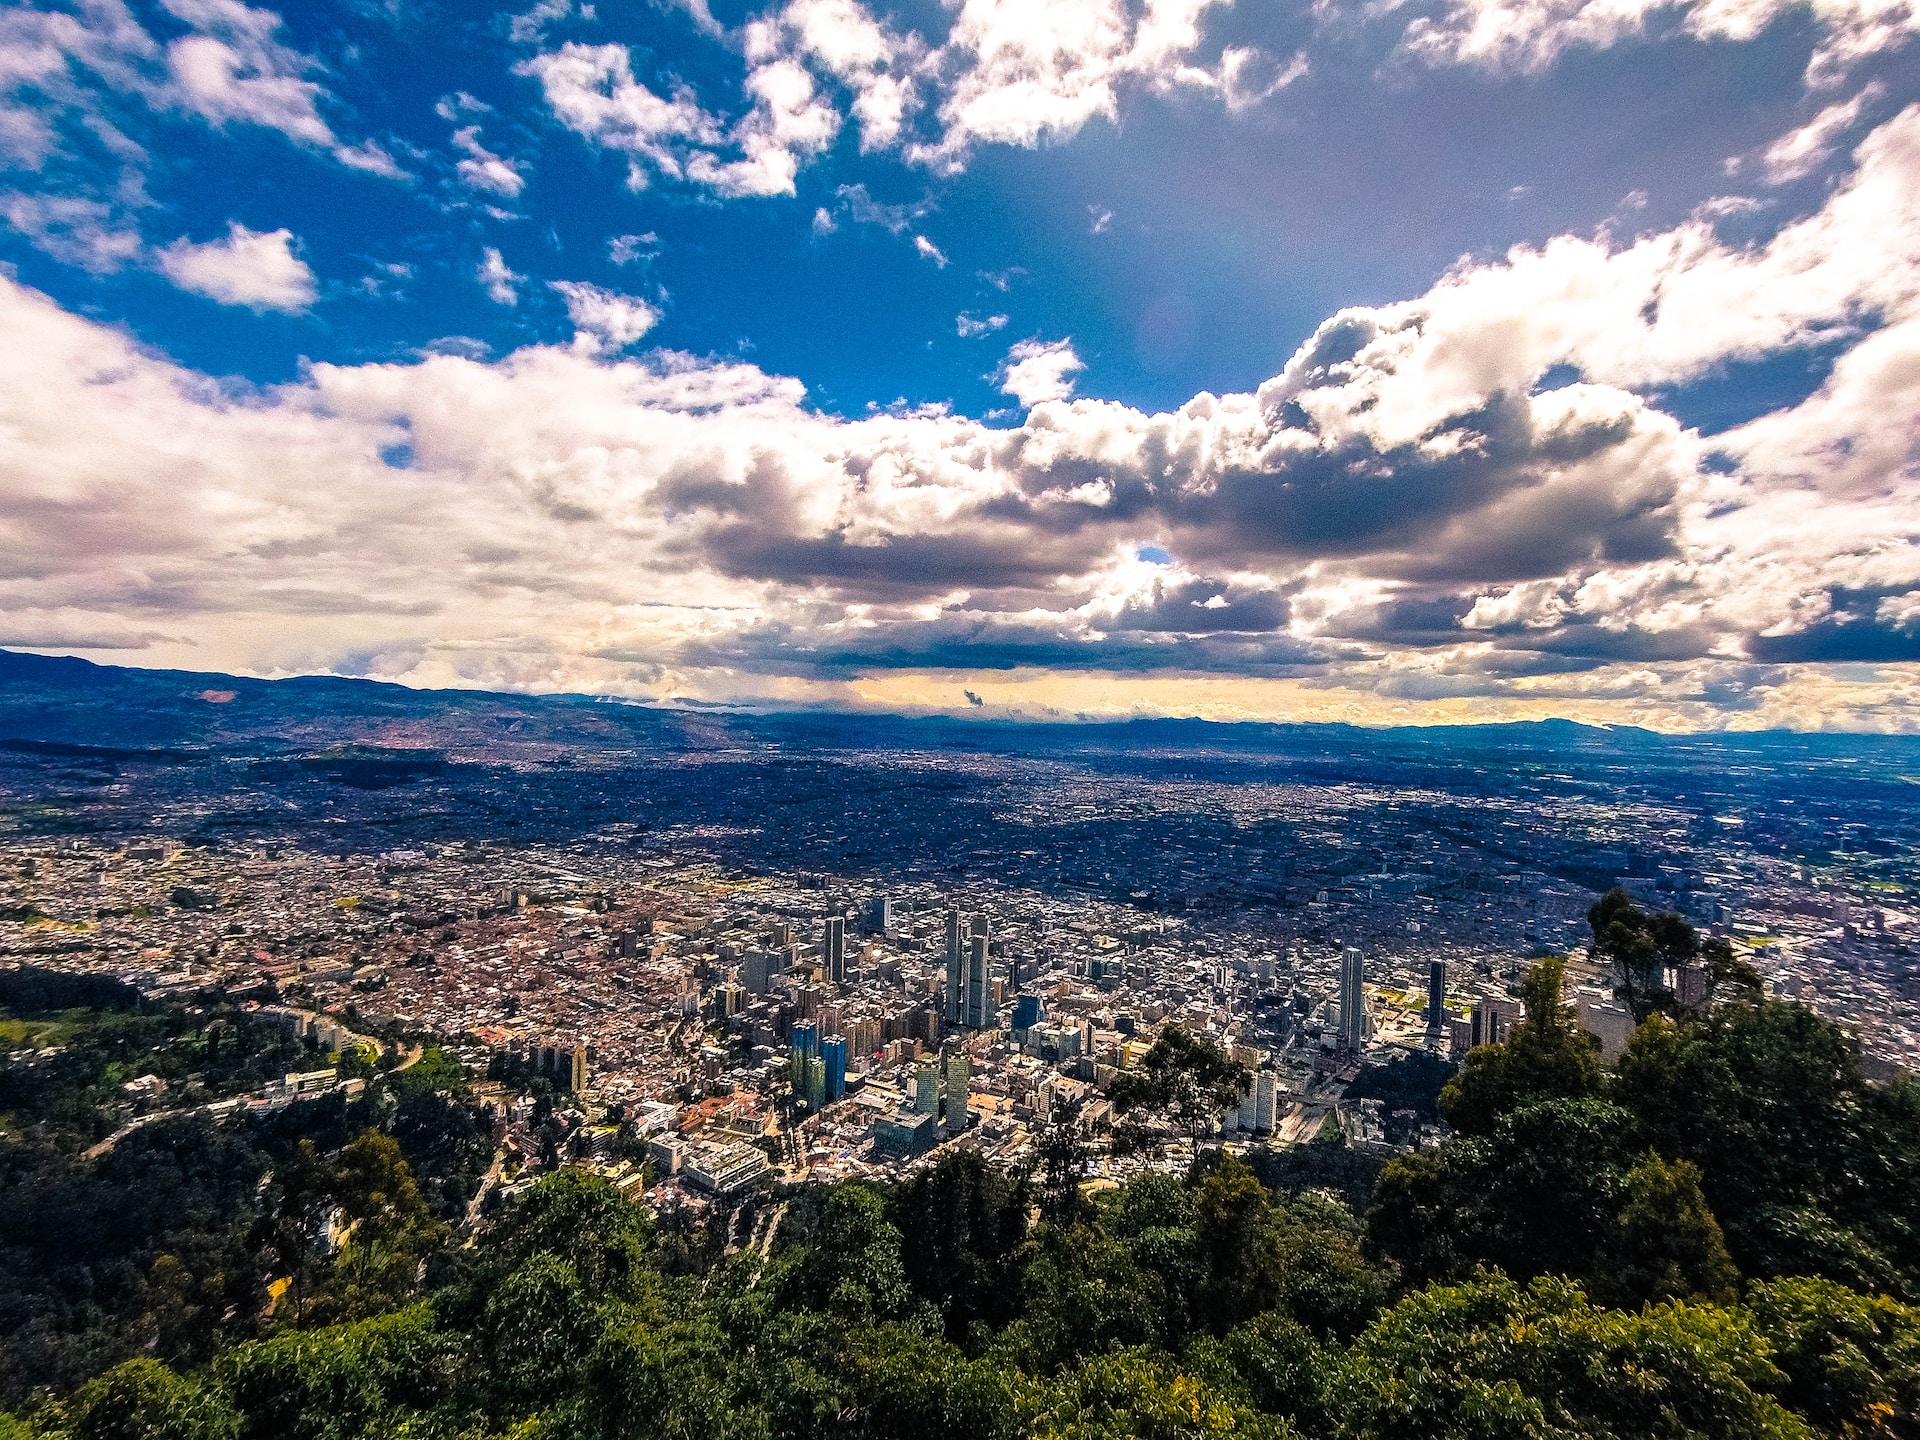 A scenic view of Bogota, Colombia from Monserrate mountain